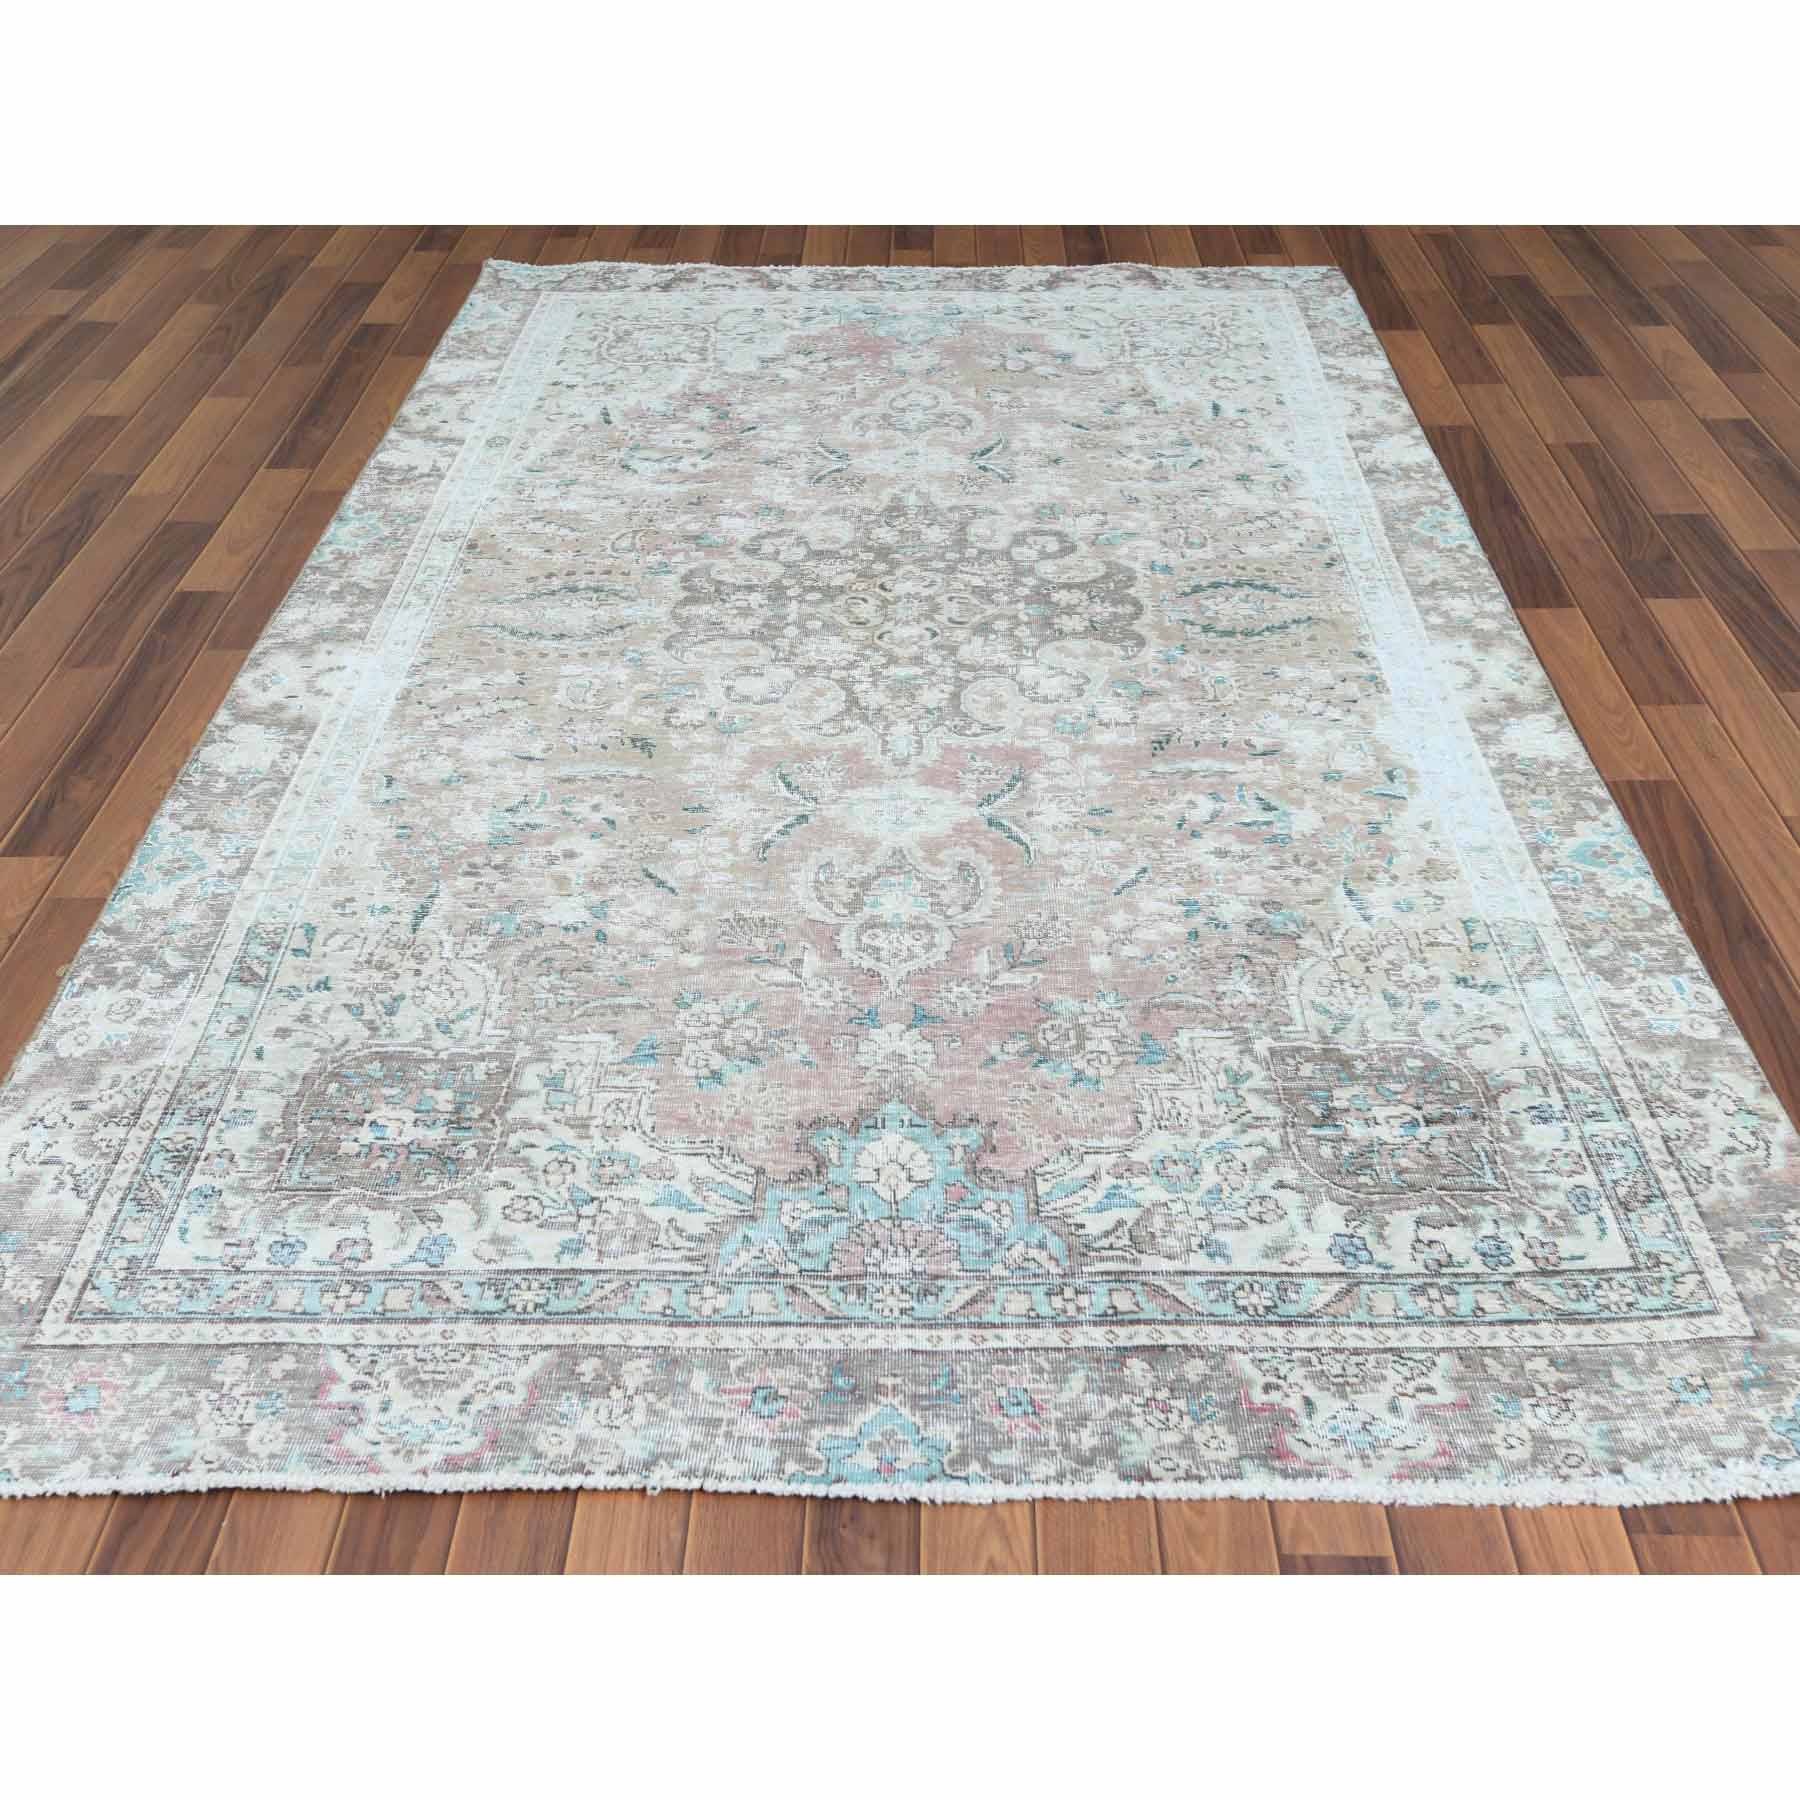 White-Wash-Vintage-Silver-Wash-Hand-Knotted-Rug-300965